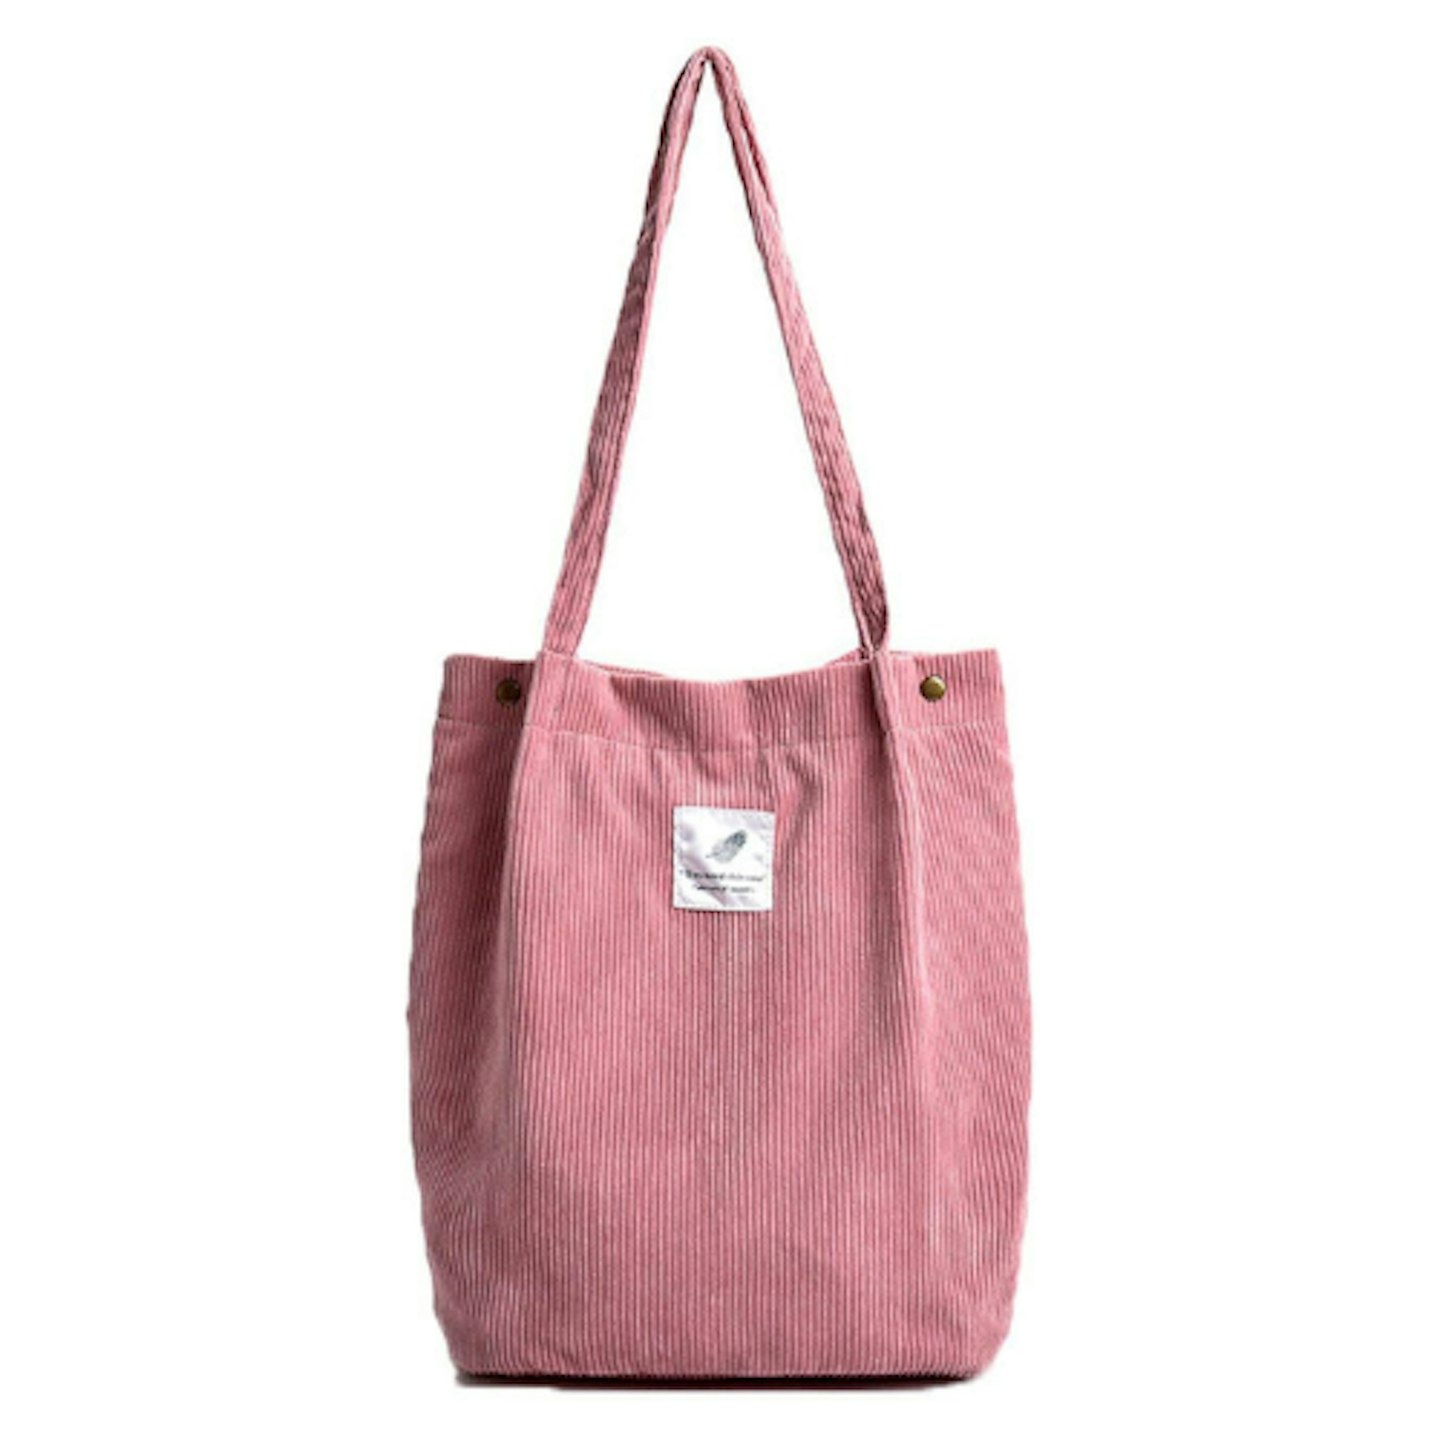 Pink corduroy tote bag on white background